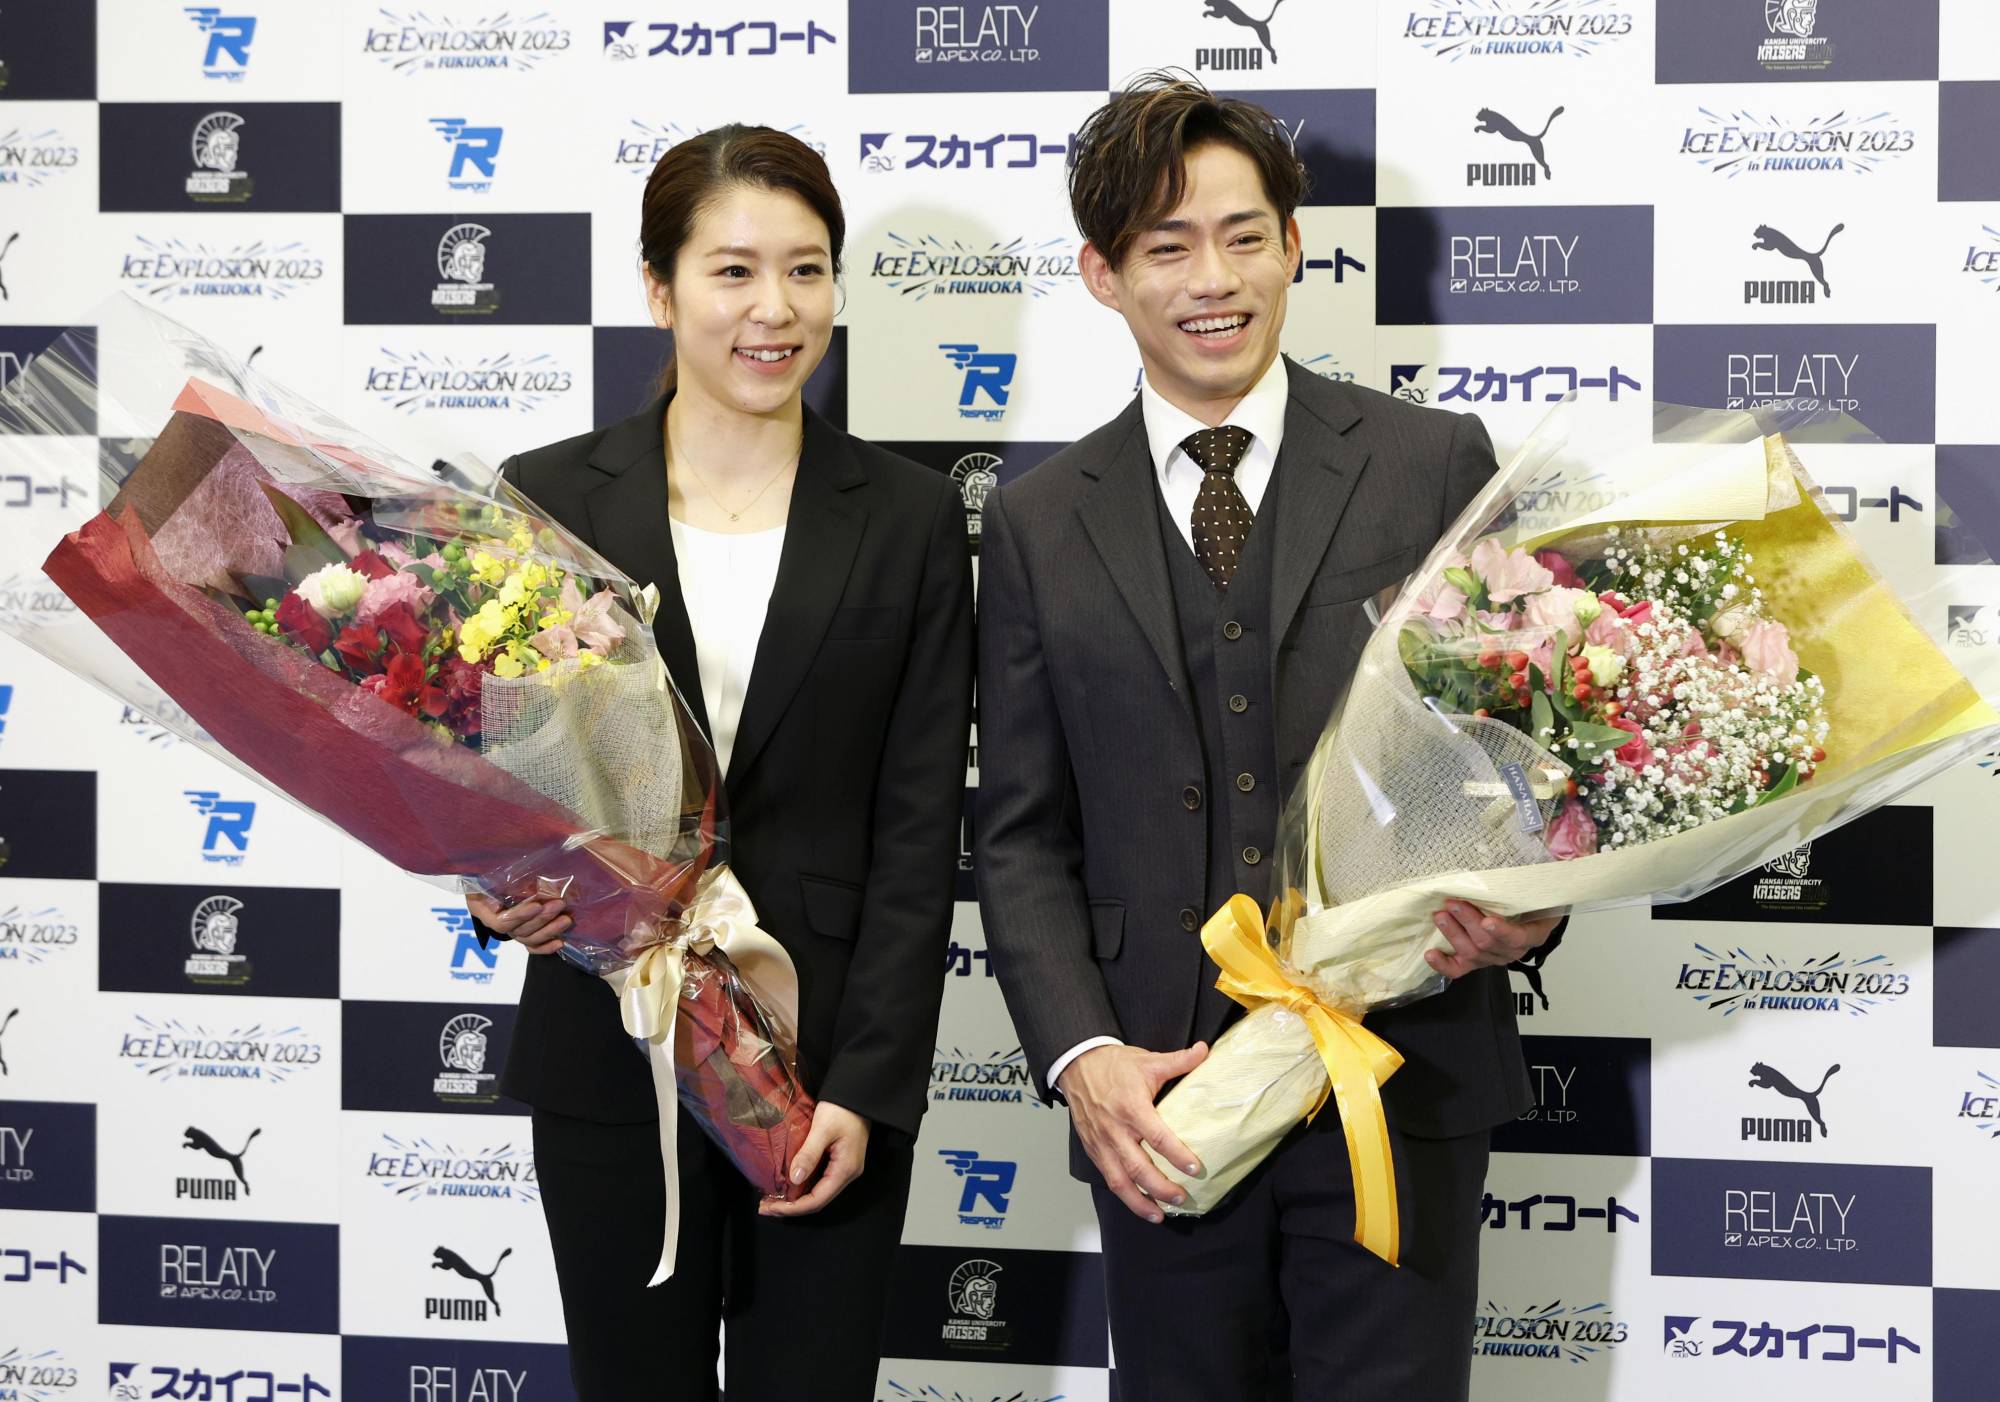 Kana Muramoto (left) says she decided to step down from competition rather than find another partner following Daisuke Takahashi's decision to retire. | KYODO